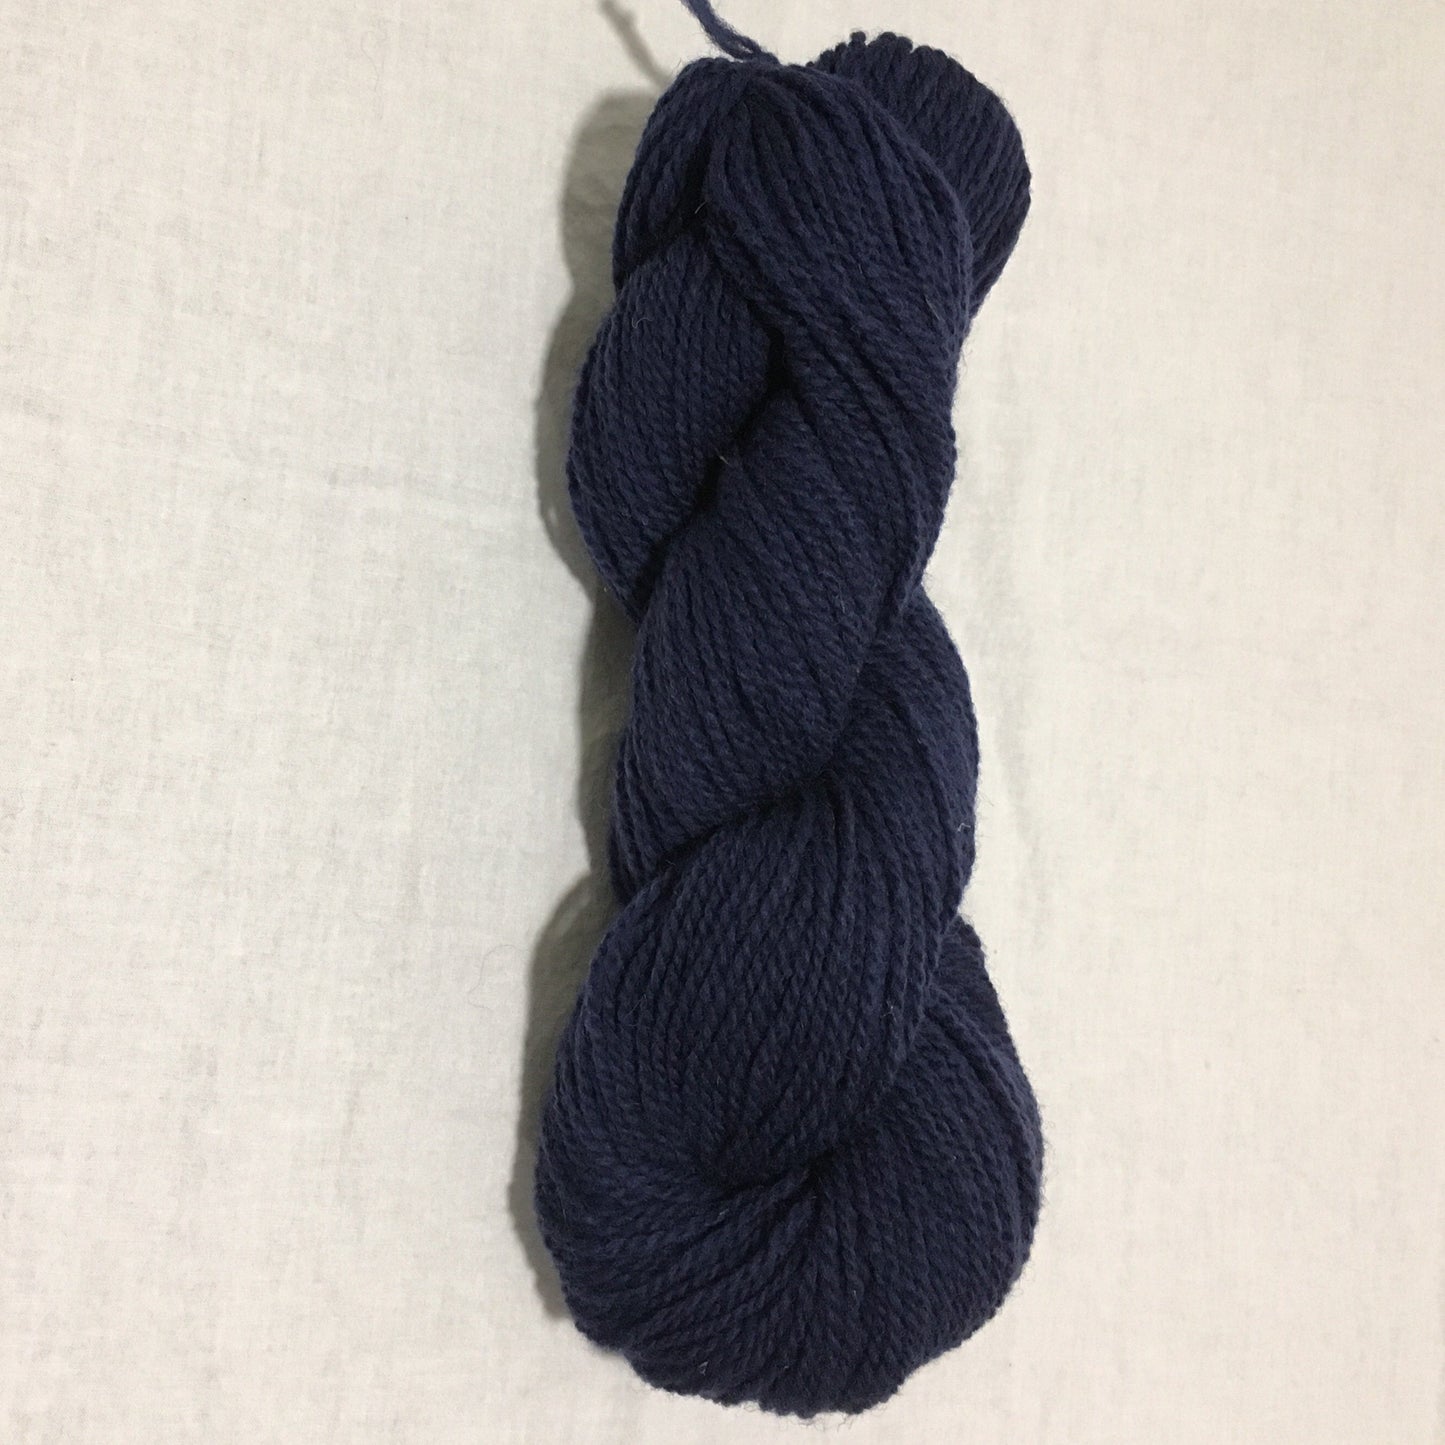 Worsted two ply - 11 shades available